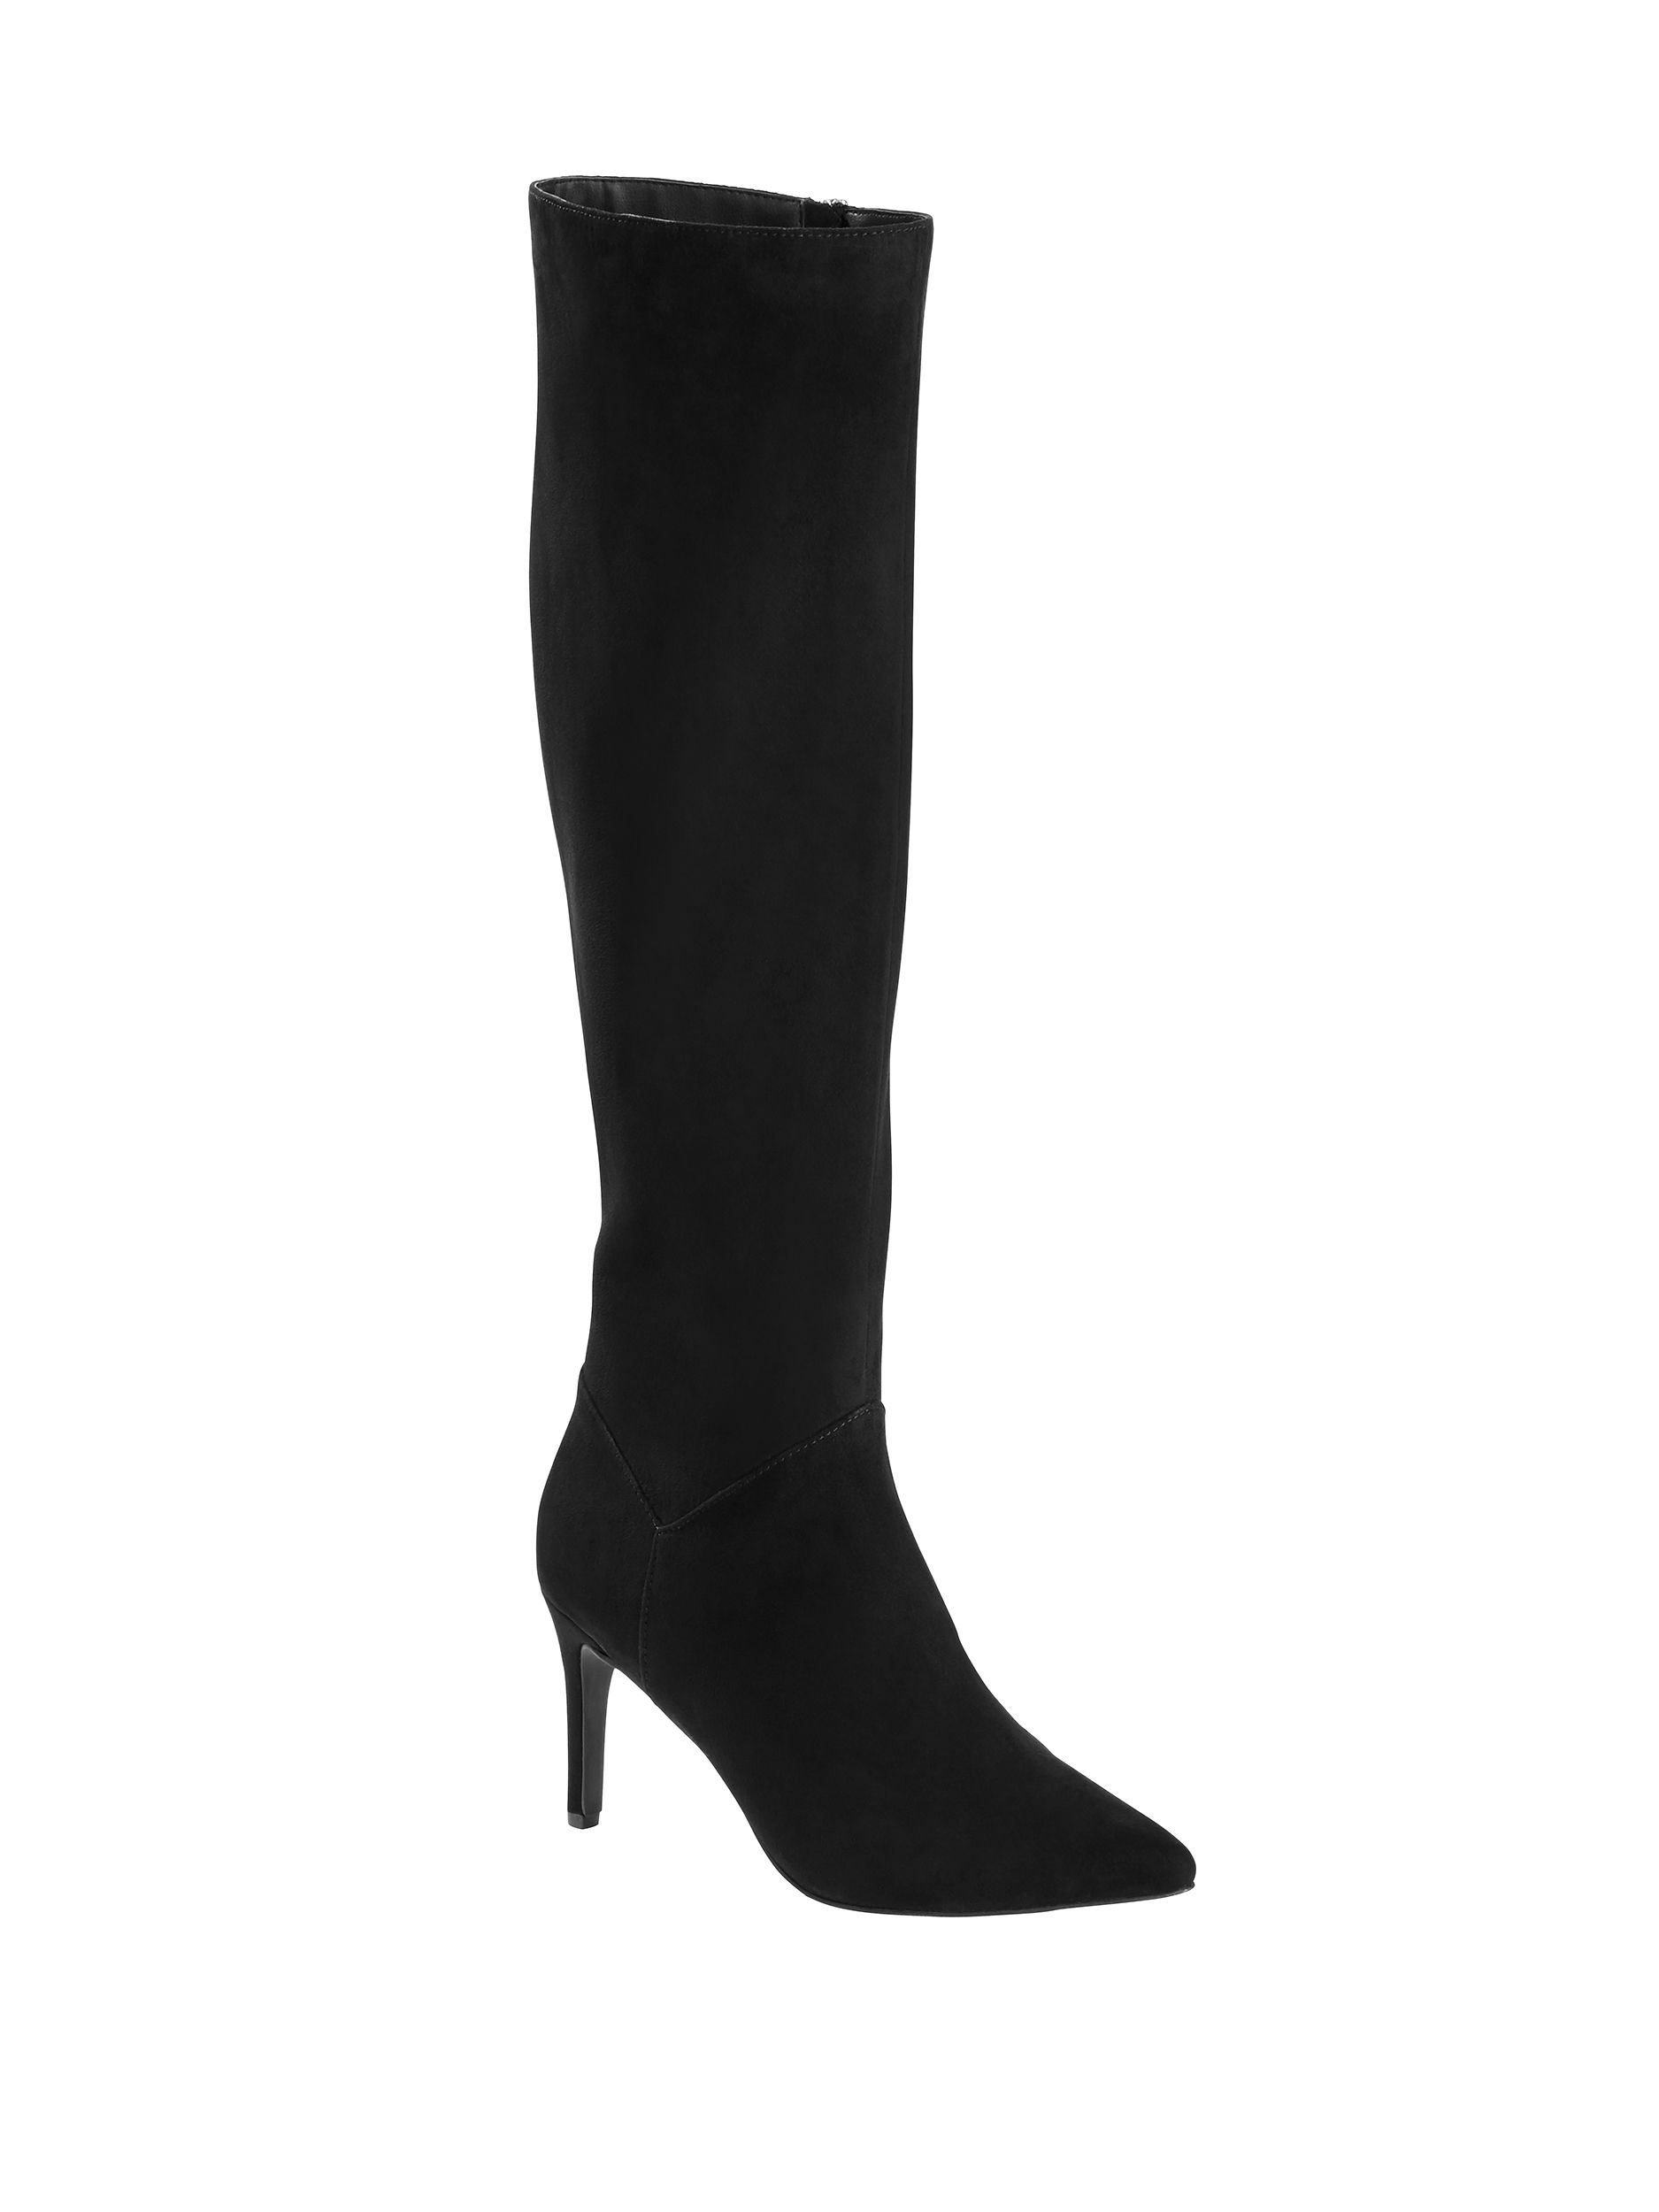 ScoopScoop Sascha Stiletto Boot Women'sAverage rating:3out of5stars, based on3reviews3 reviewsSco... | Walmart (US)